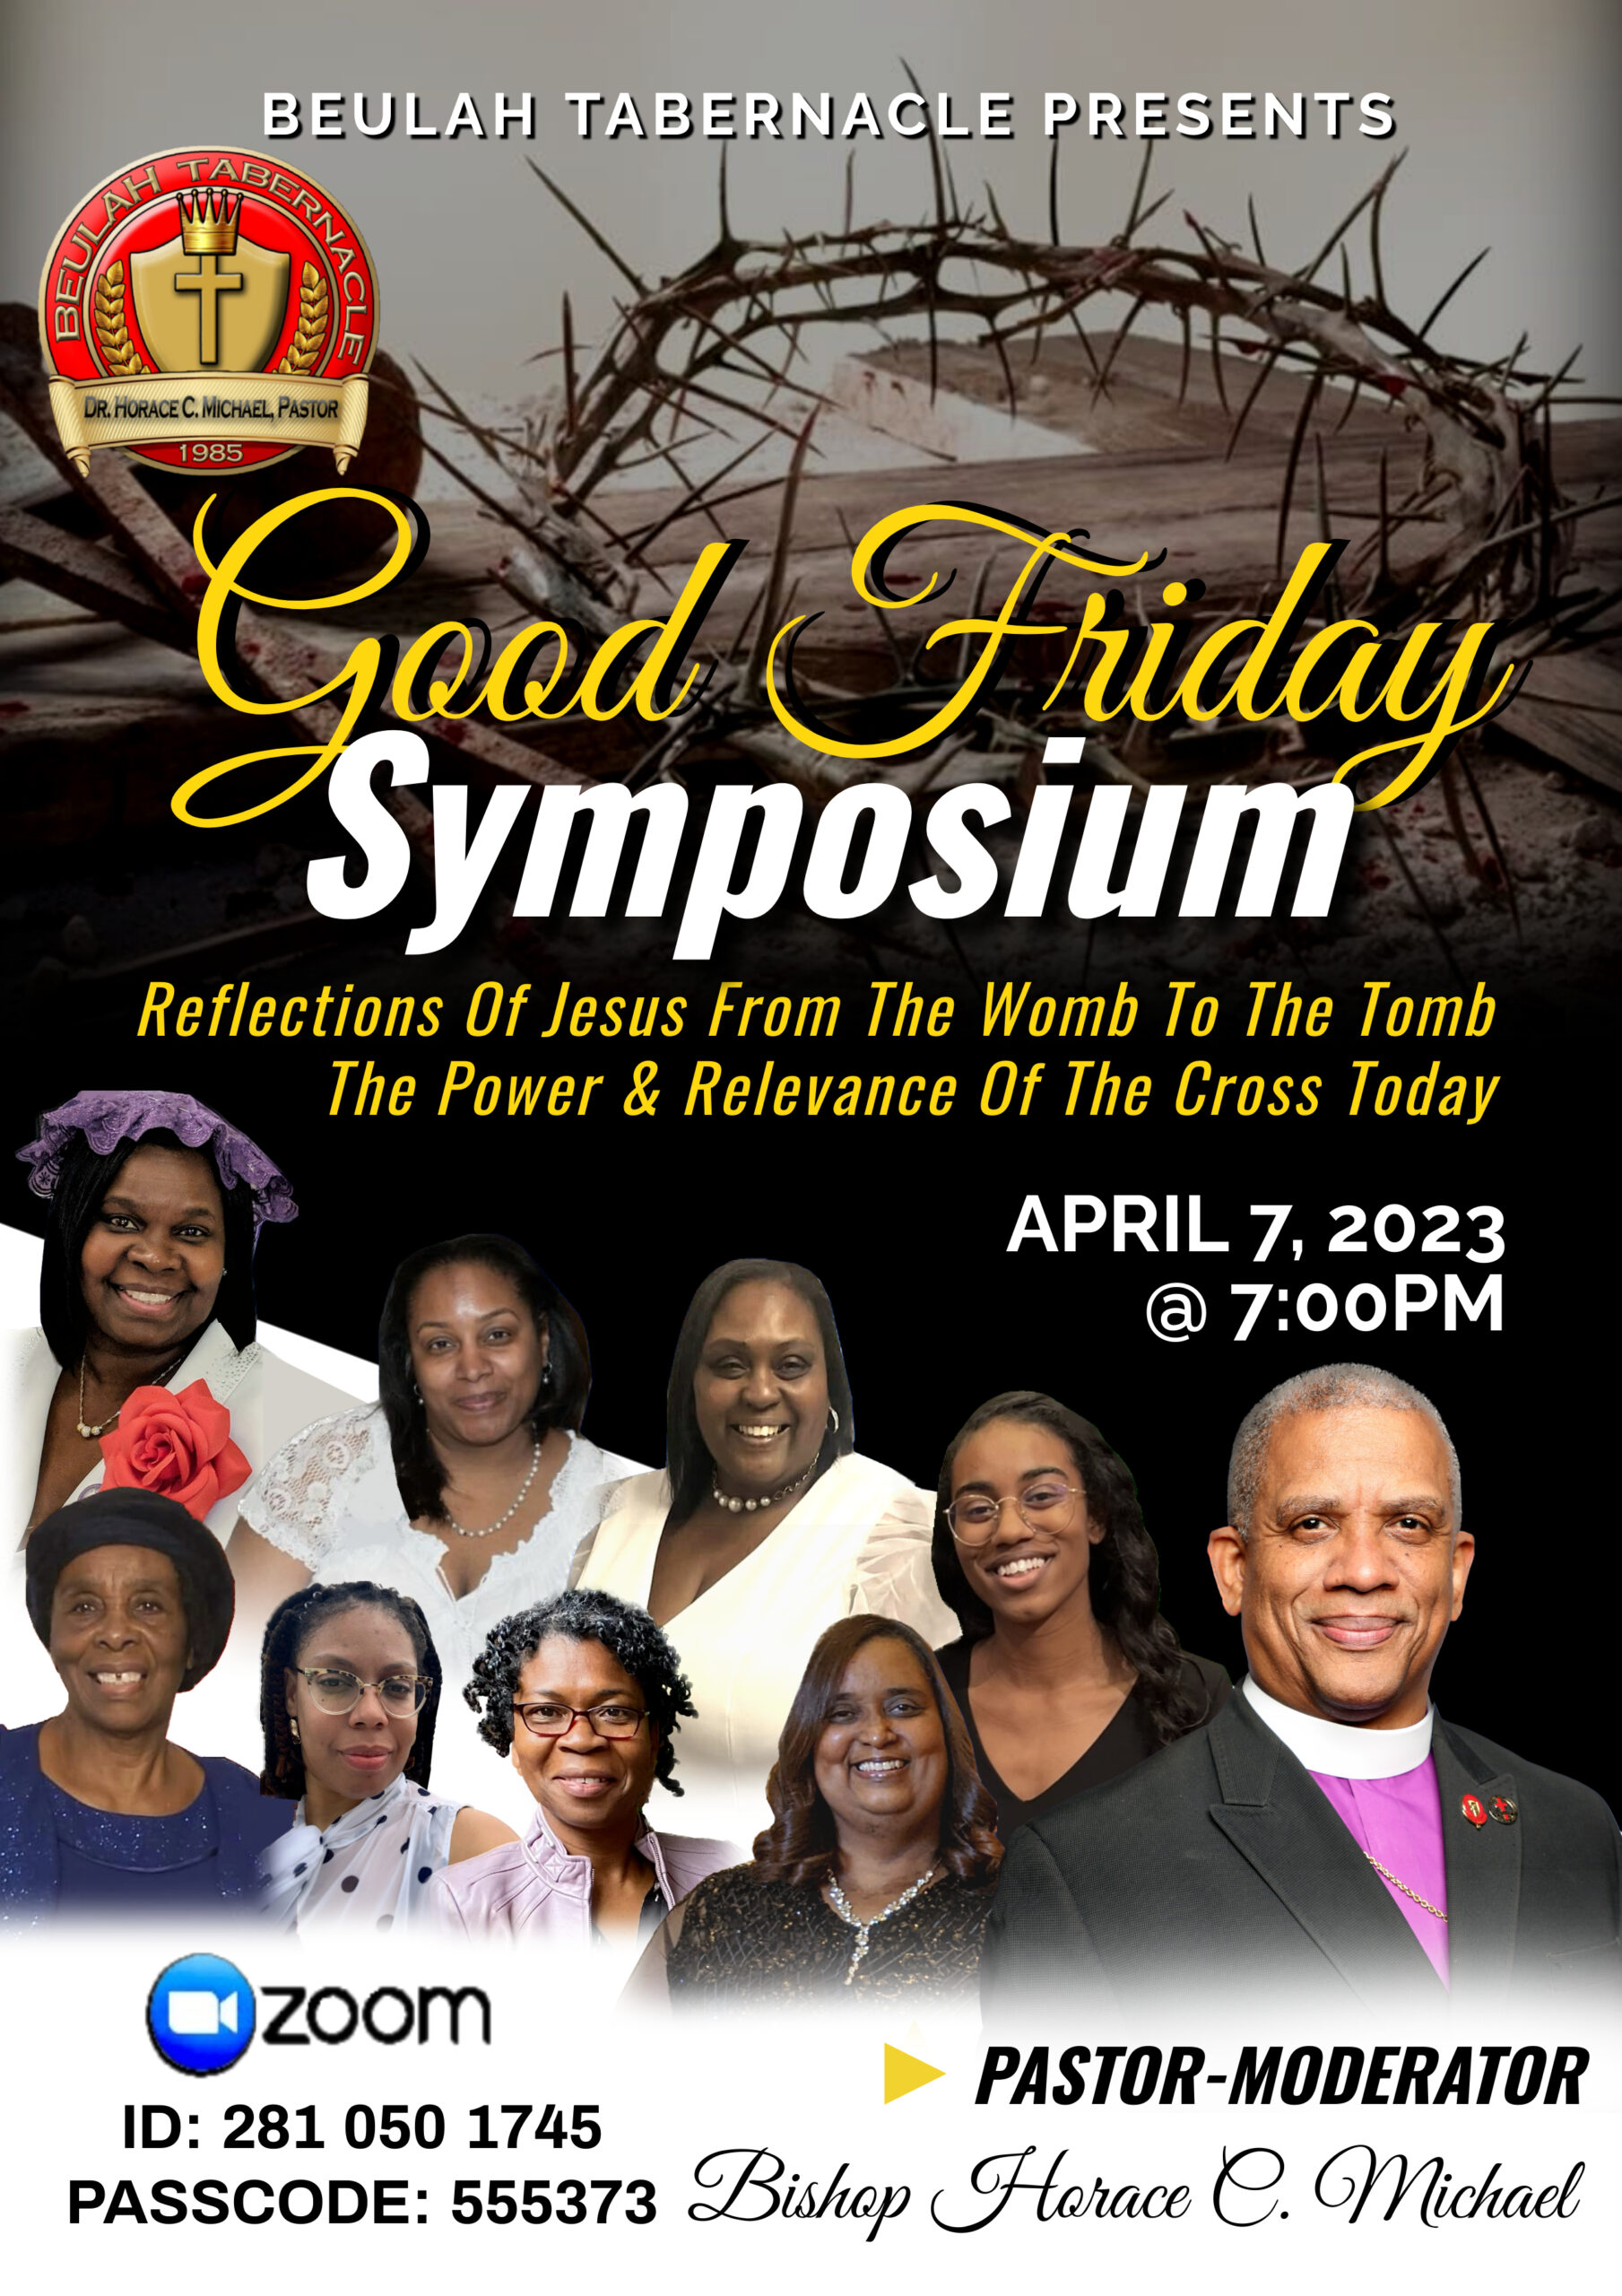 Good Friday 2023 - The Symposium - Reflections of Jesus From The Womb To The Tomb @ ZOOM Meeting ID: 281 050 1745 Password: 555373